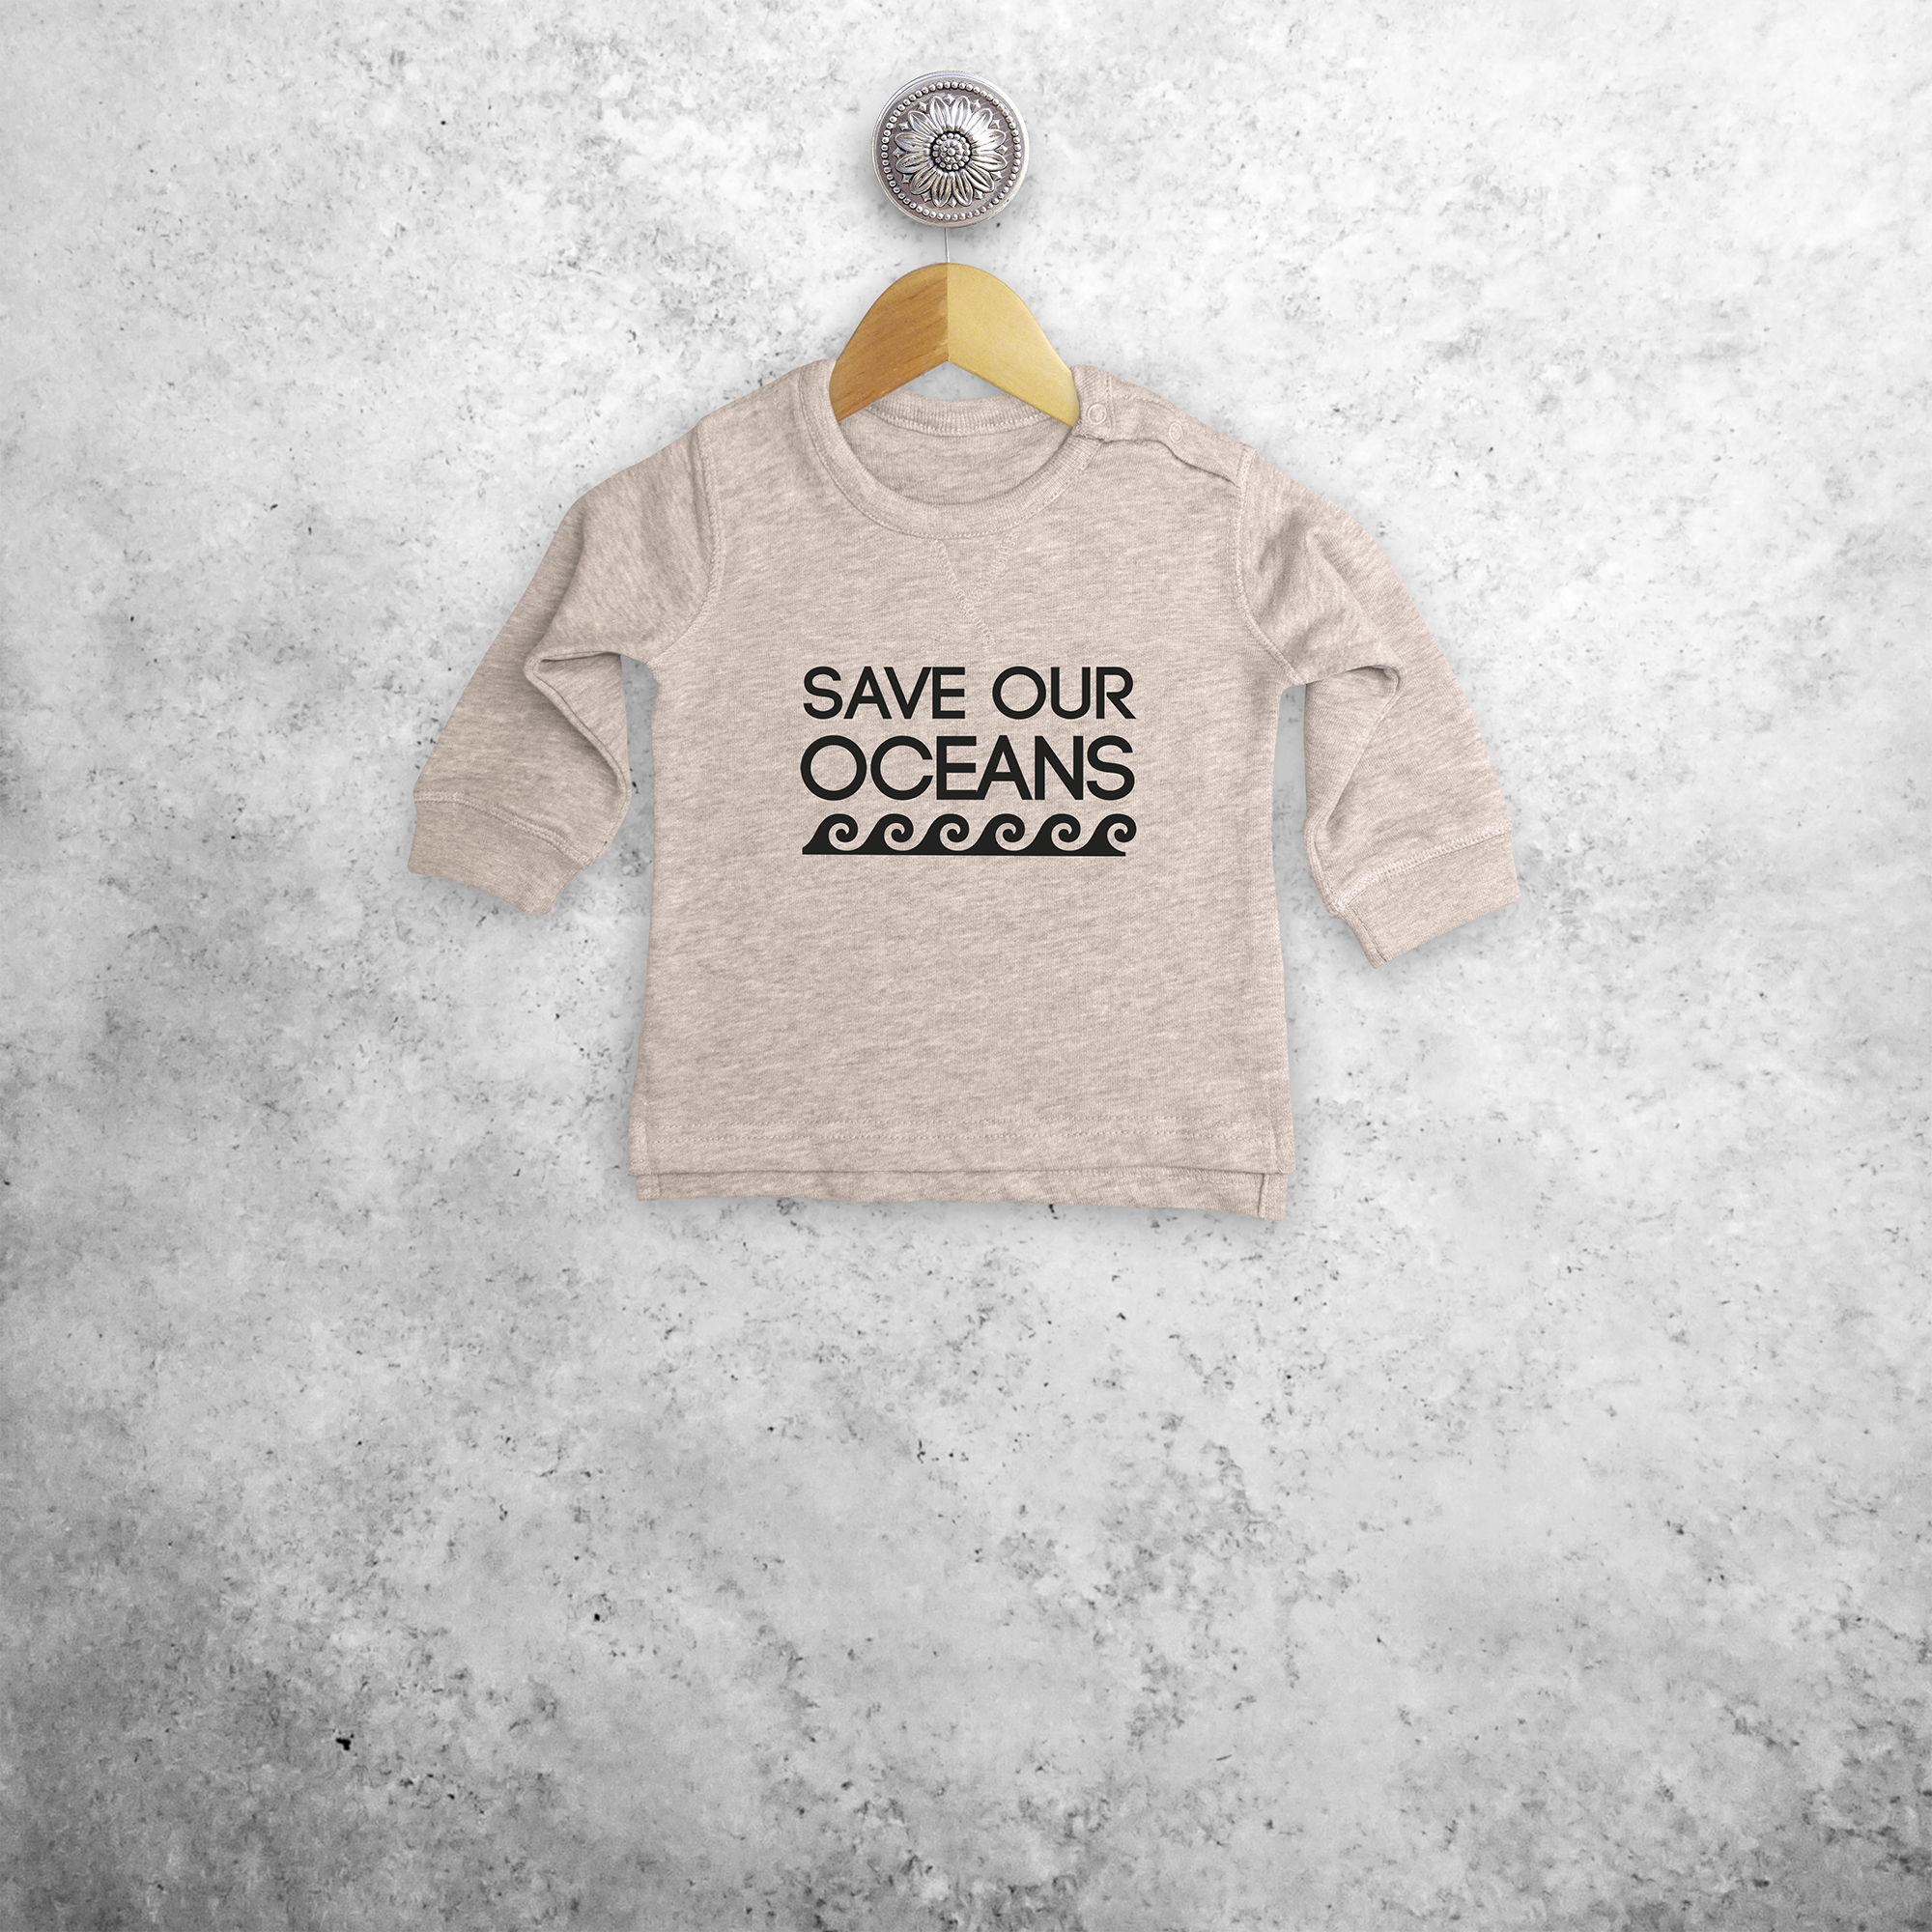 'Save our oceans' baby sweater